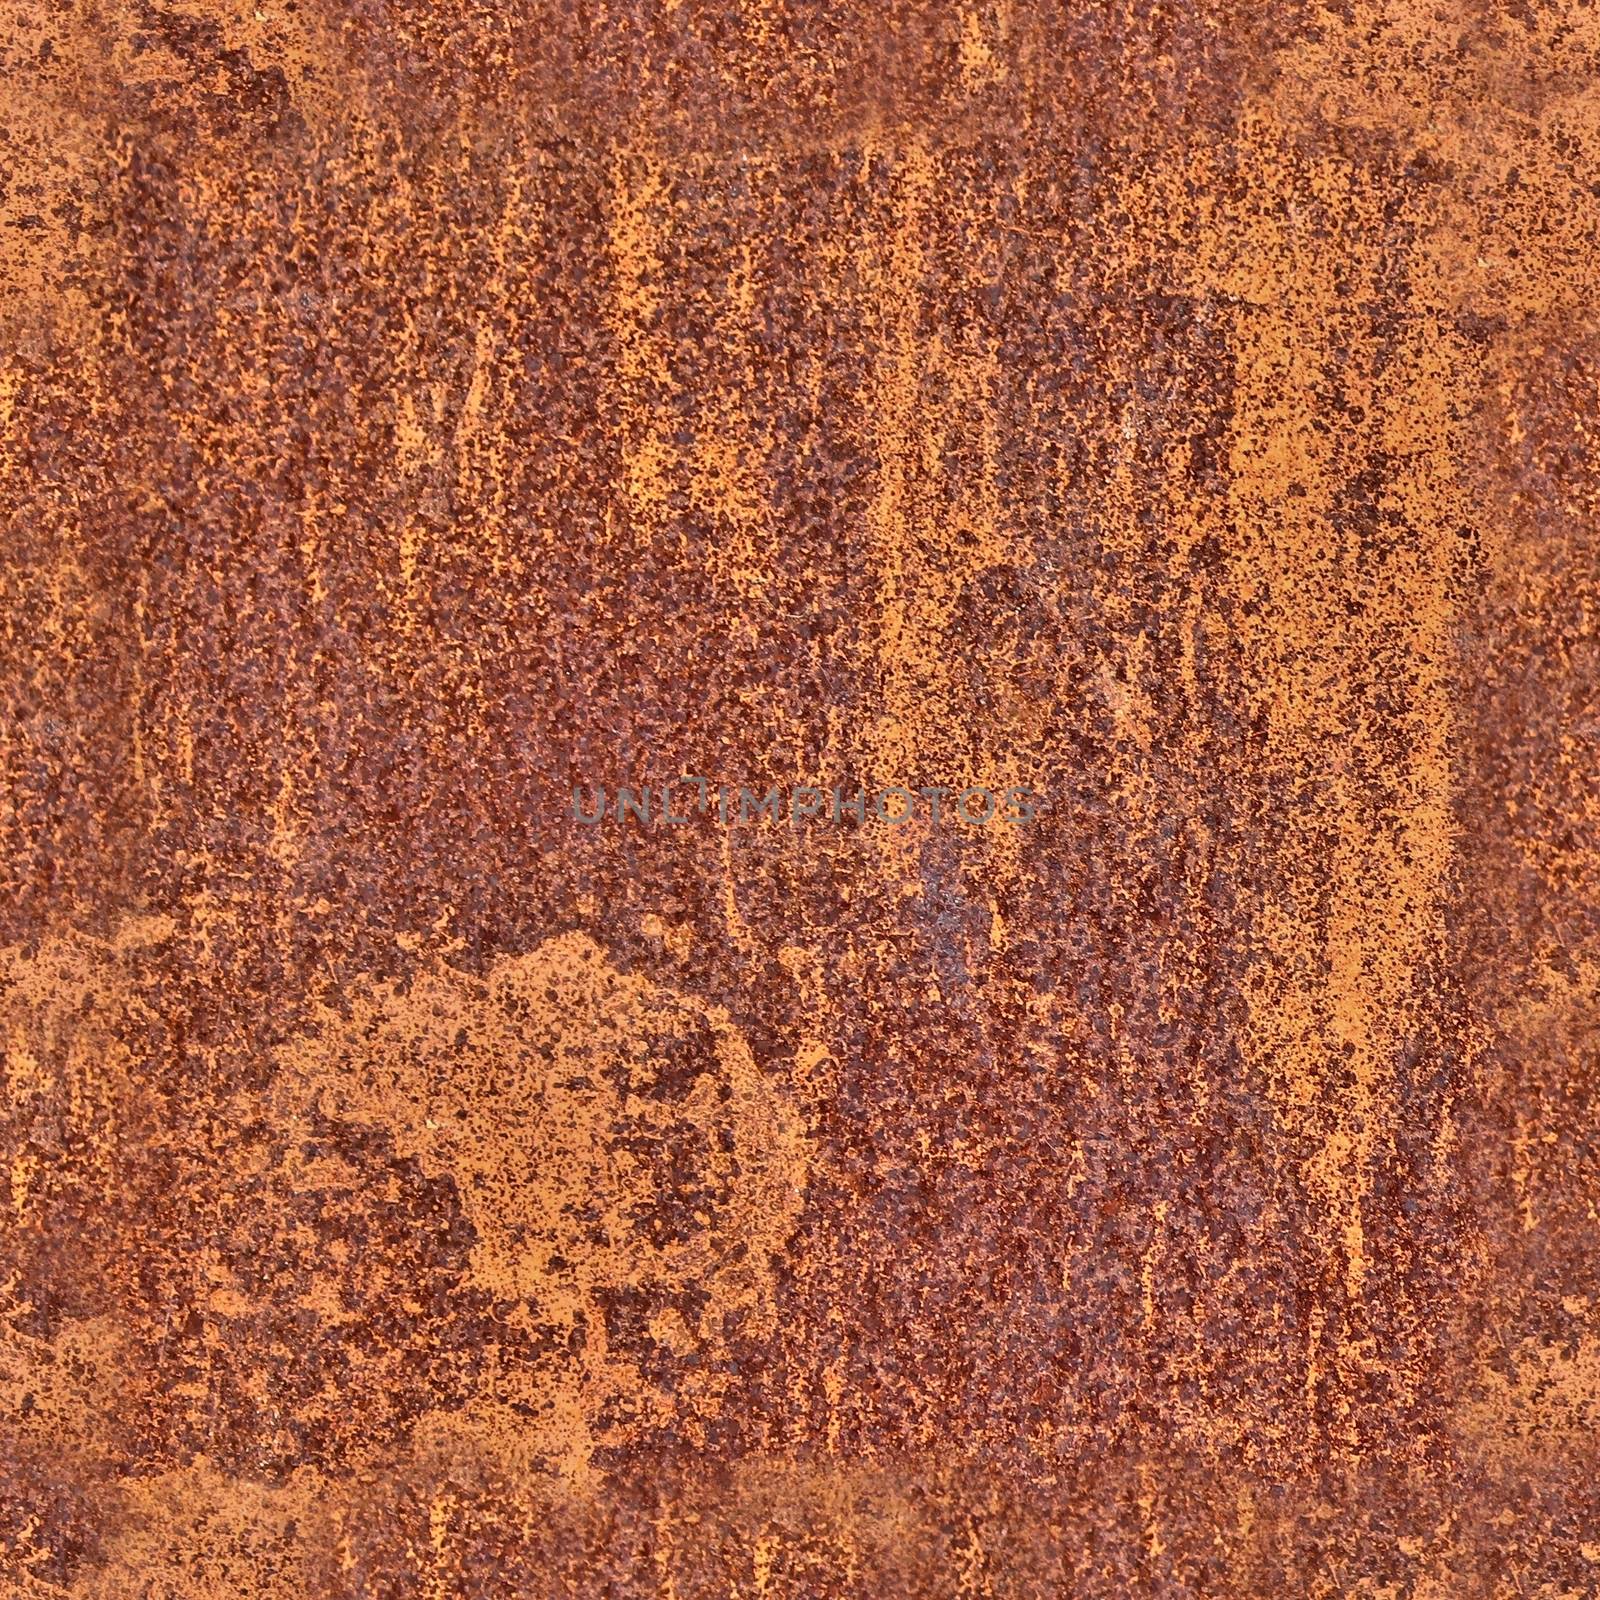 Photo realistic seamless texture pattern of rusty metal surfaces by MP_foto71